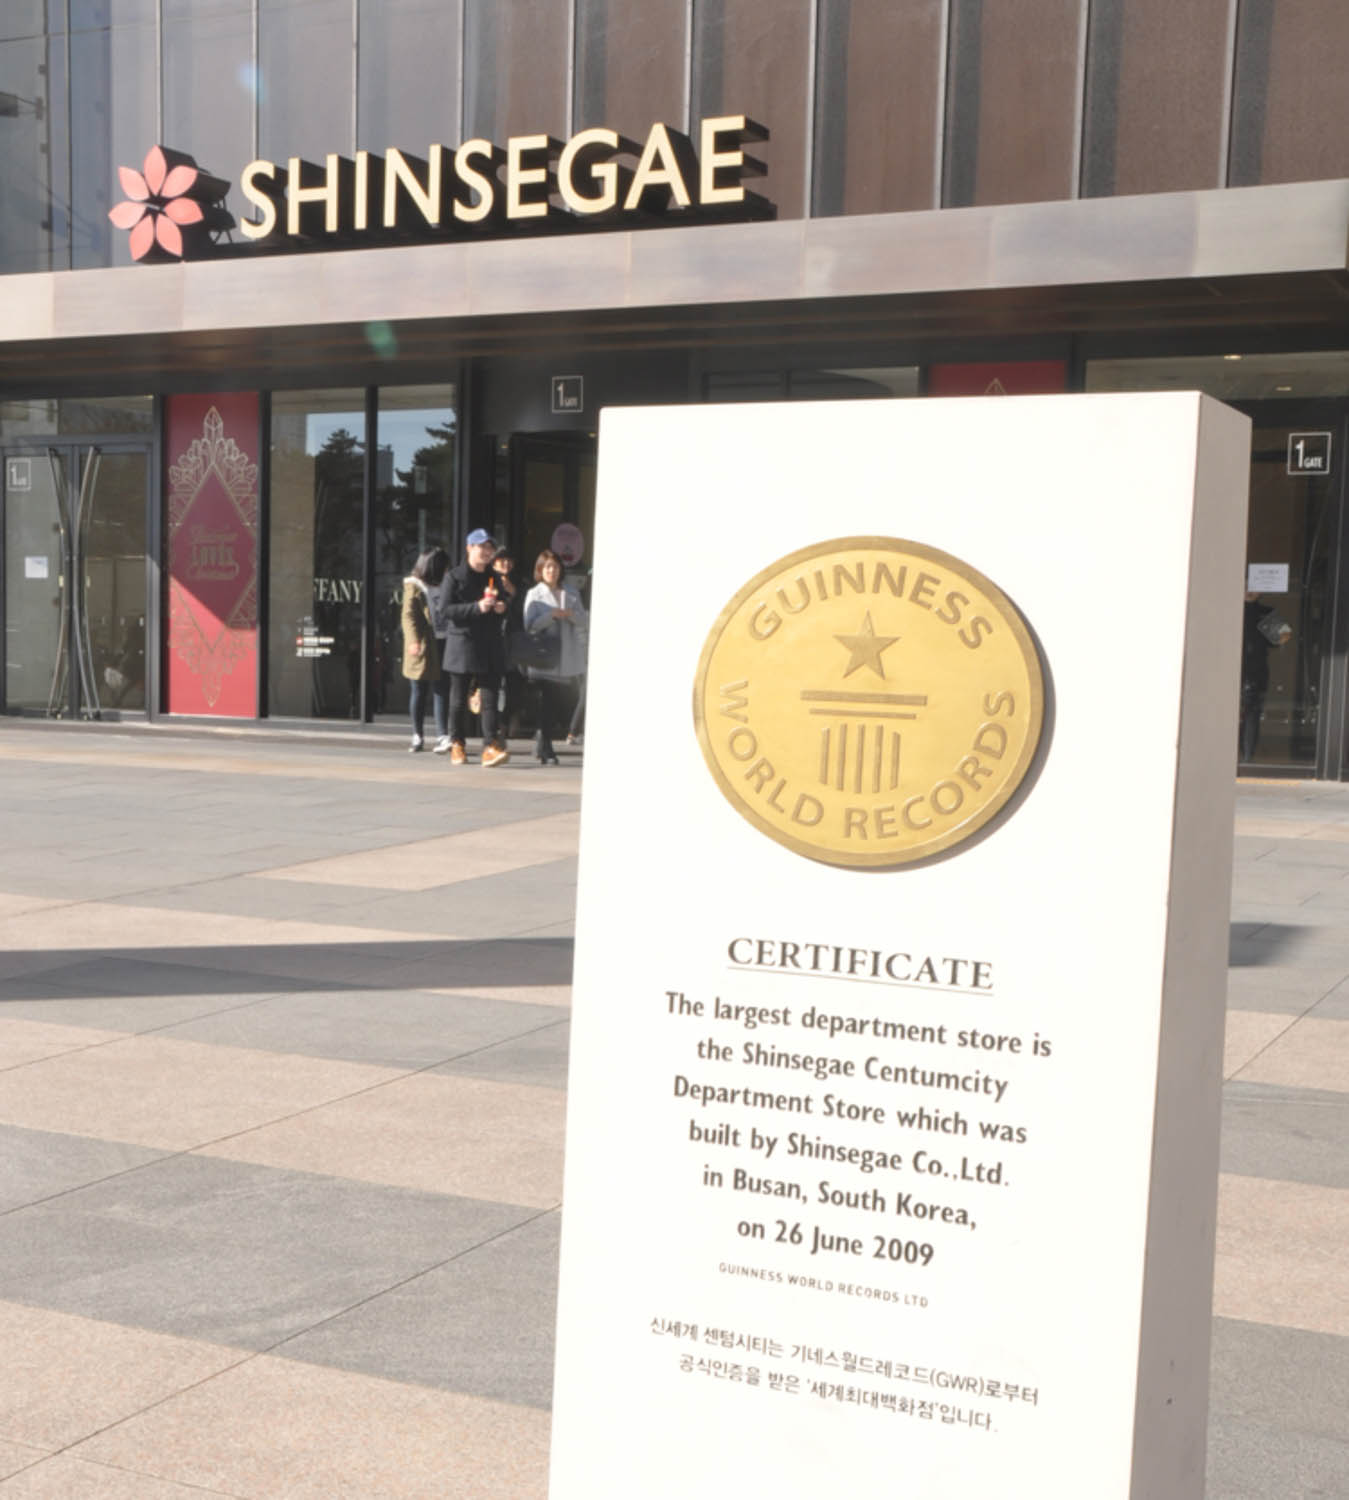 Shinsegae earned a Guinness World Record for being the largest department store in the world!